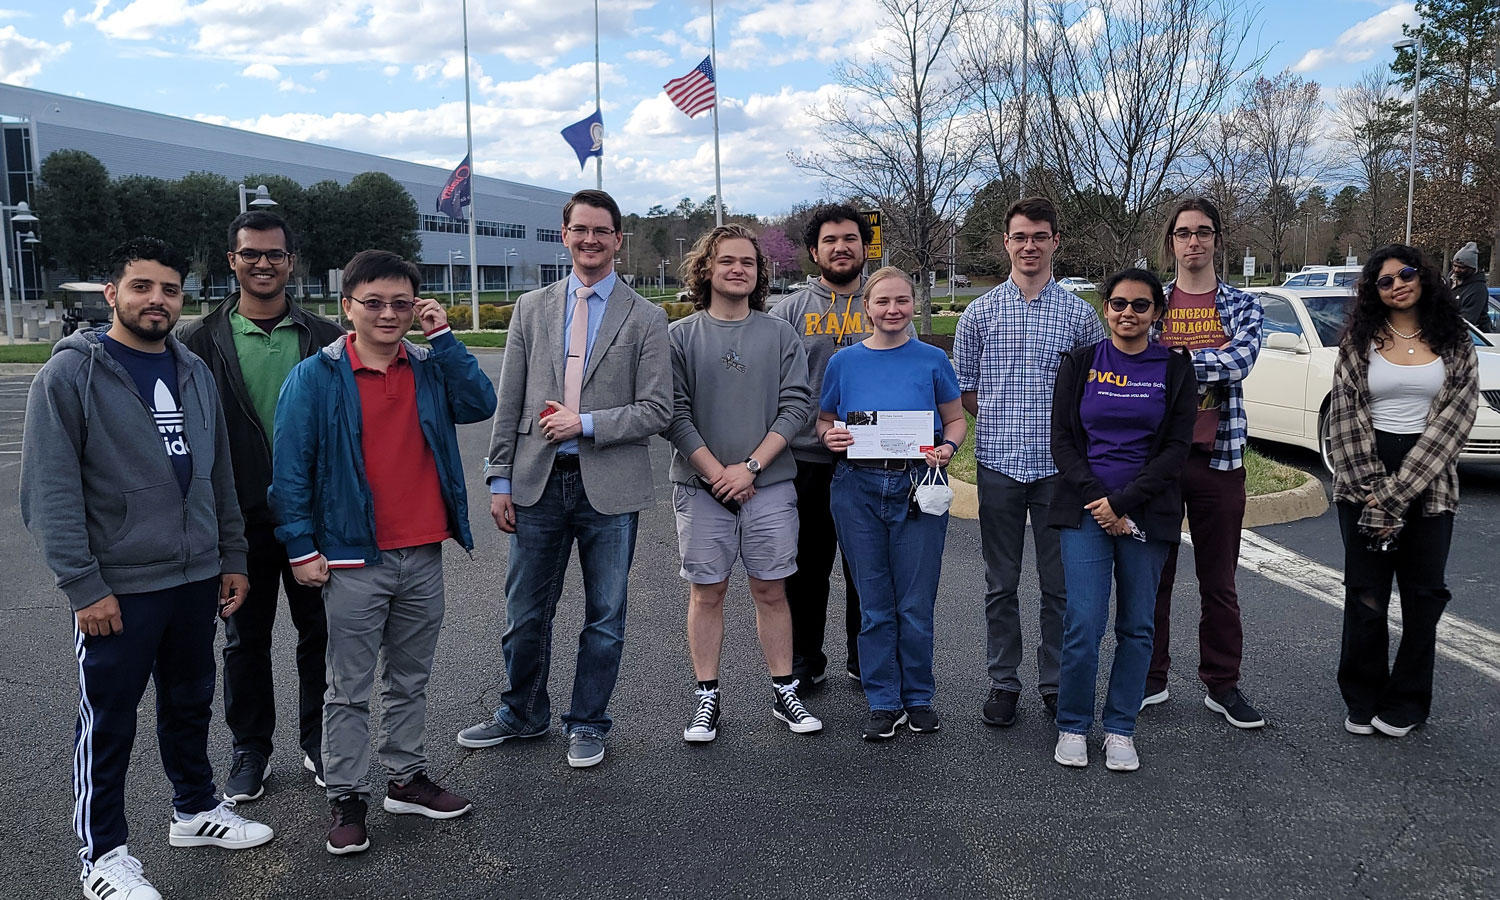 The VCU Engineering group tours a QTS data center in Richmond